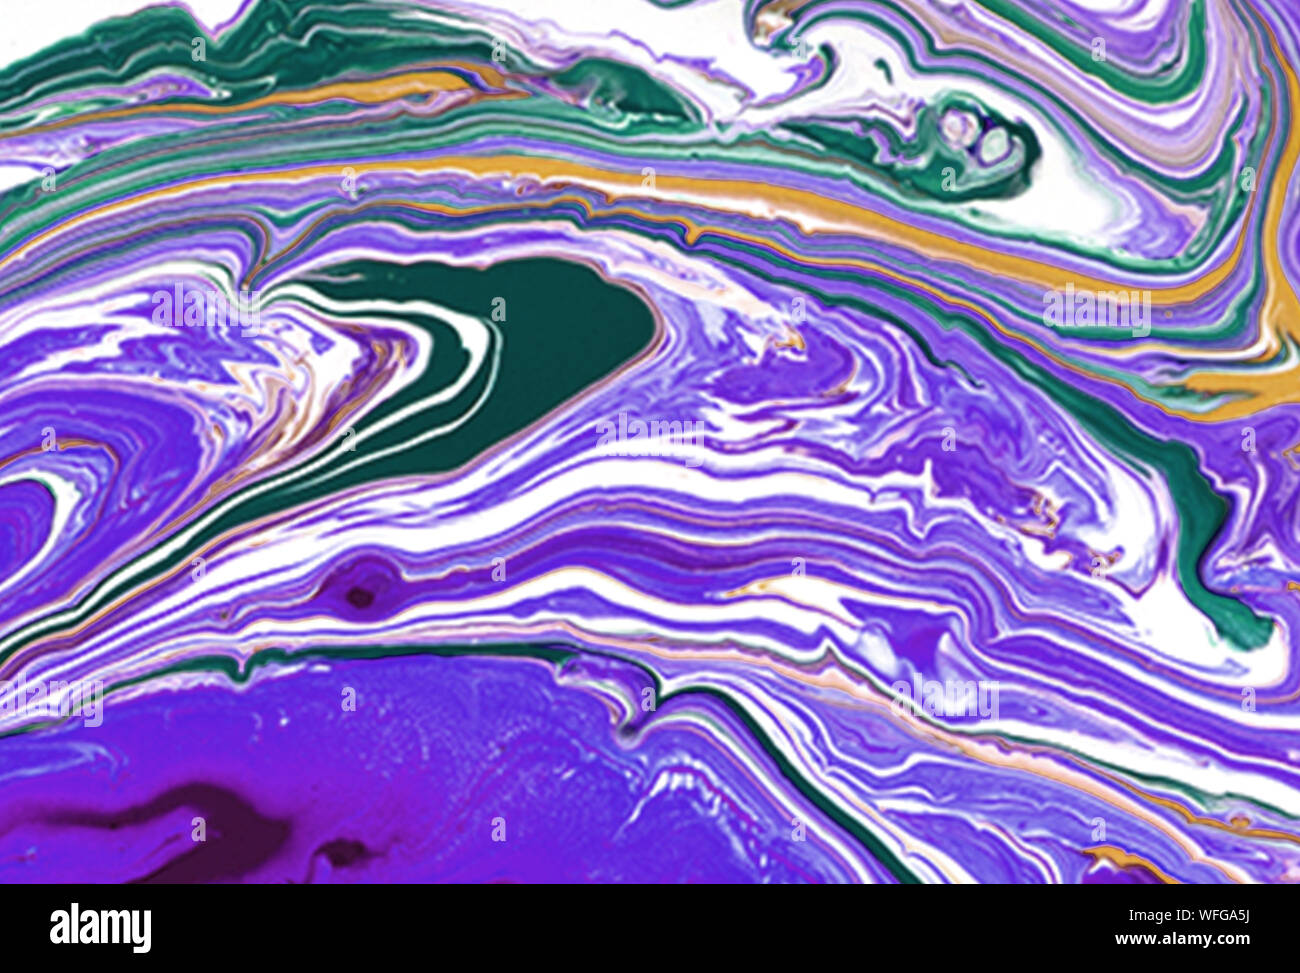 Abstract, artistic covers design. Modern fluid colors backgrounds. Drawing Stock Photo